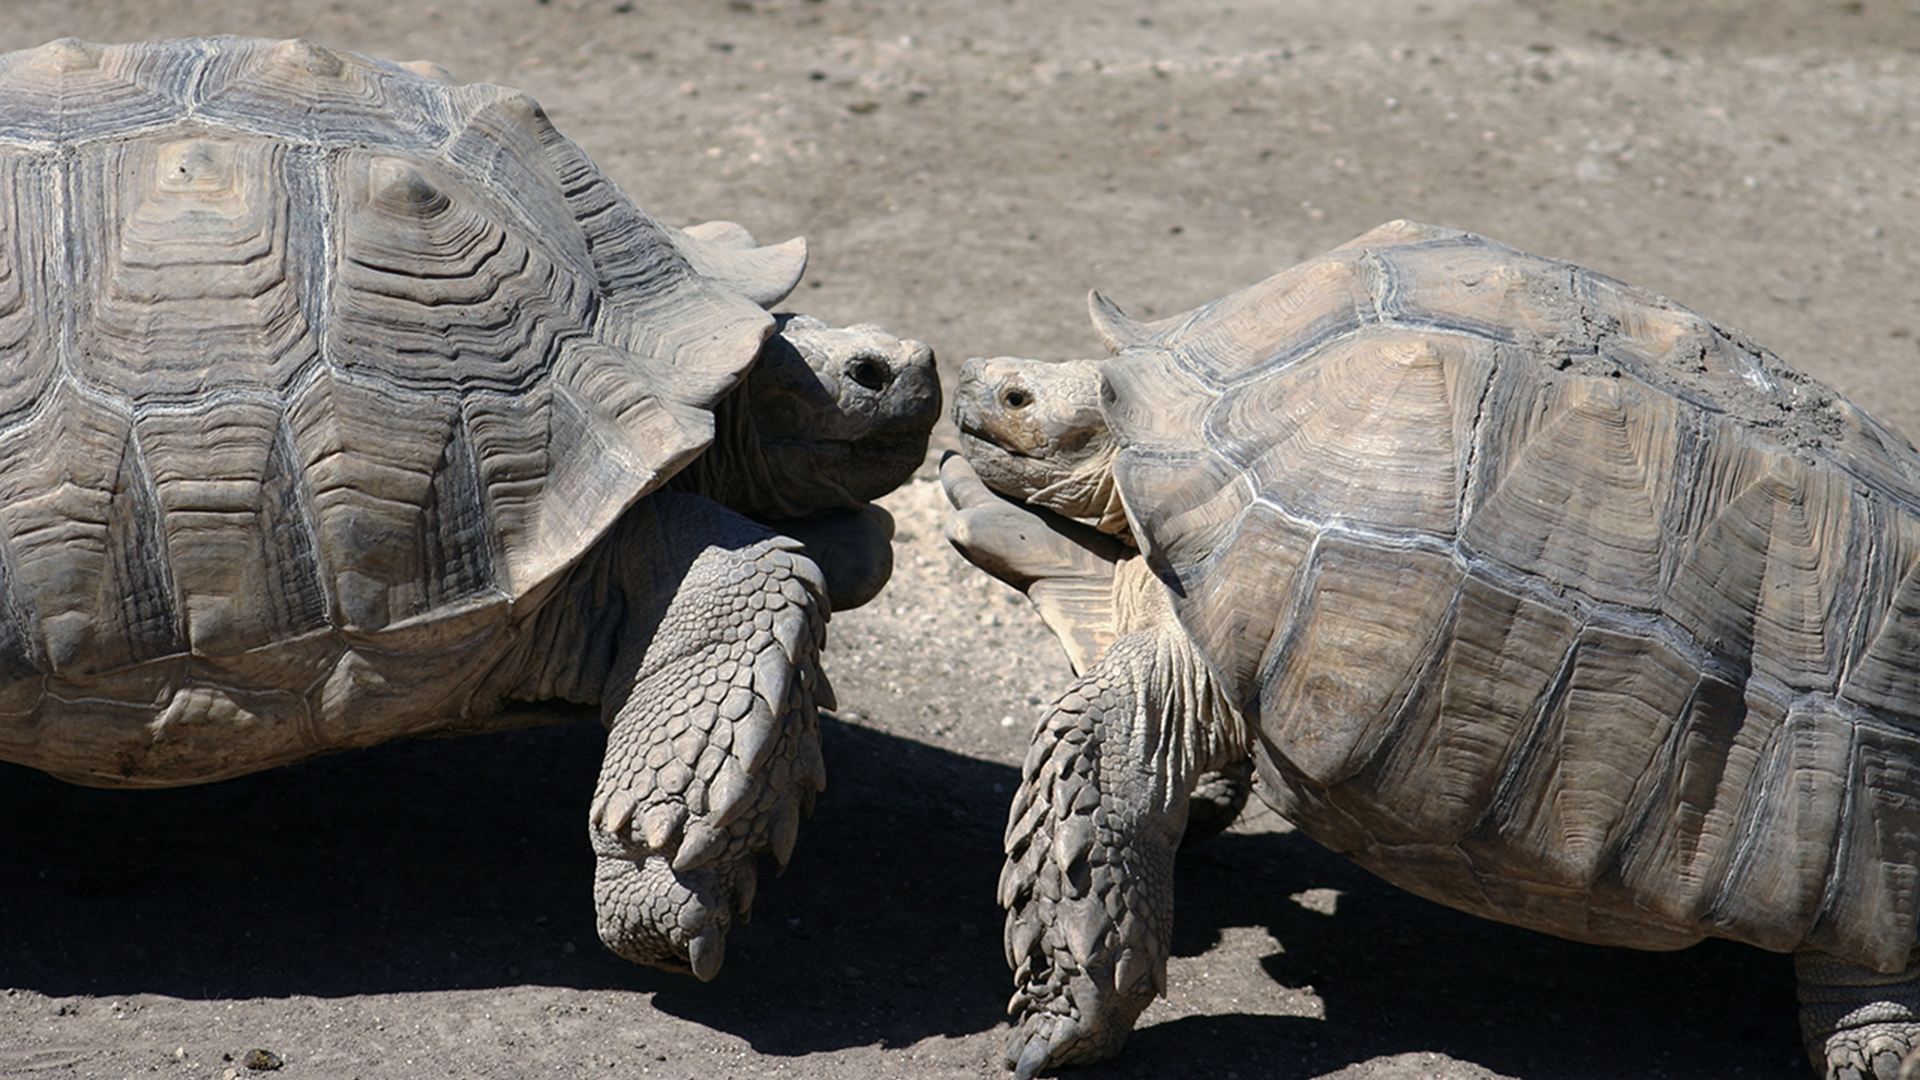 Two giant tortoises stare each other down